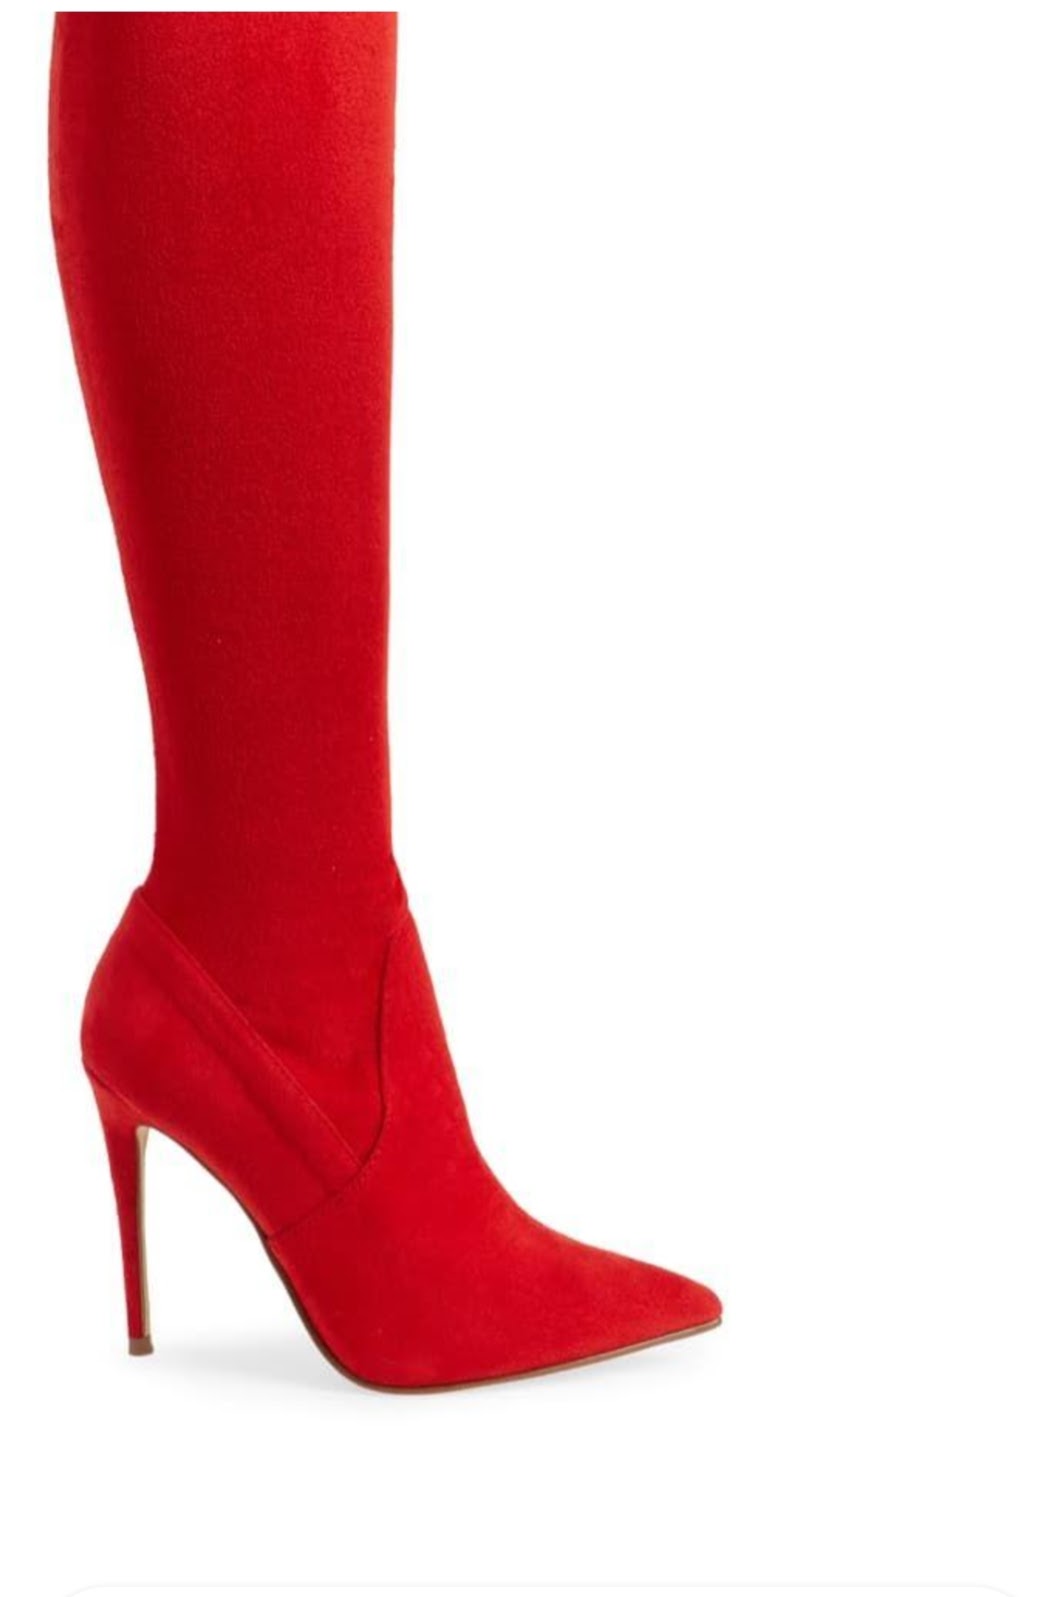 Steve Madden Dominique Red Thigh Stretch Boots Sz 9